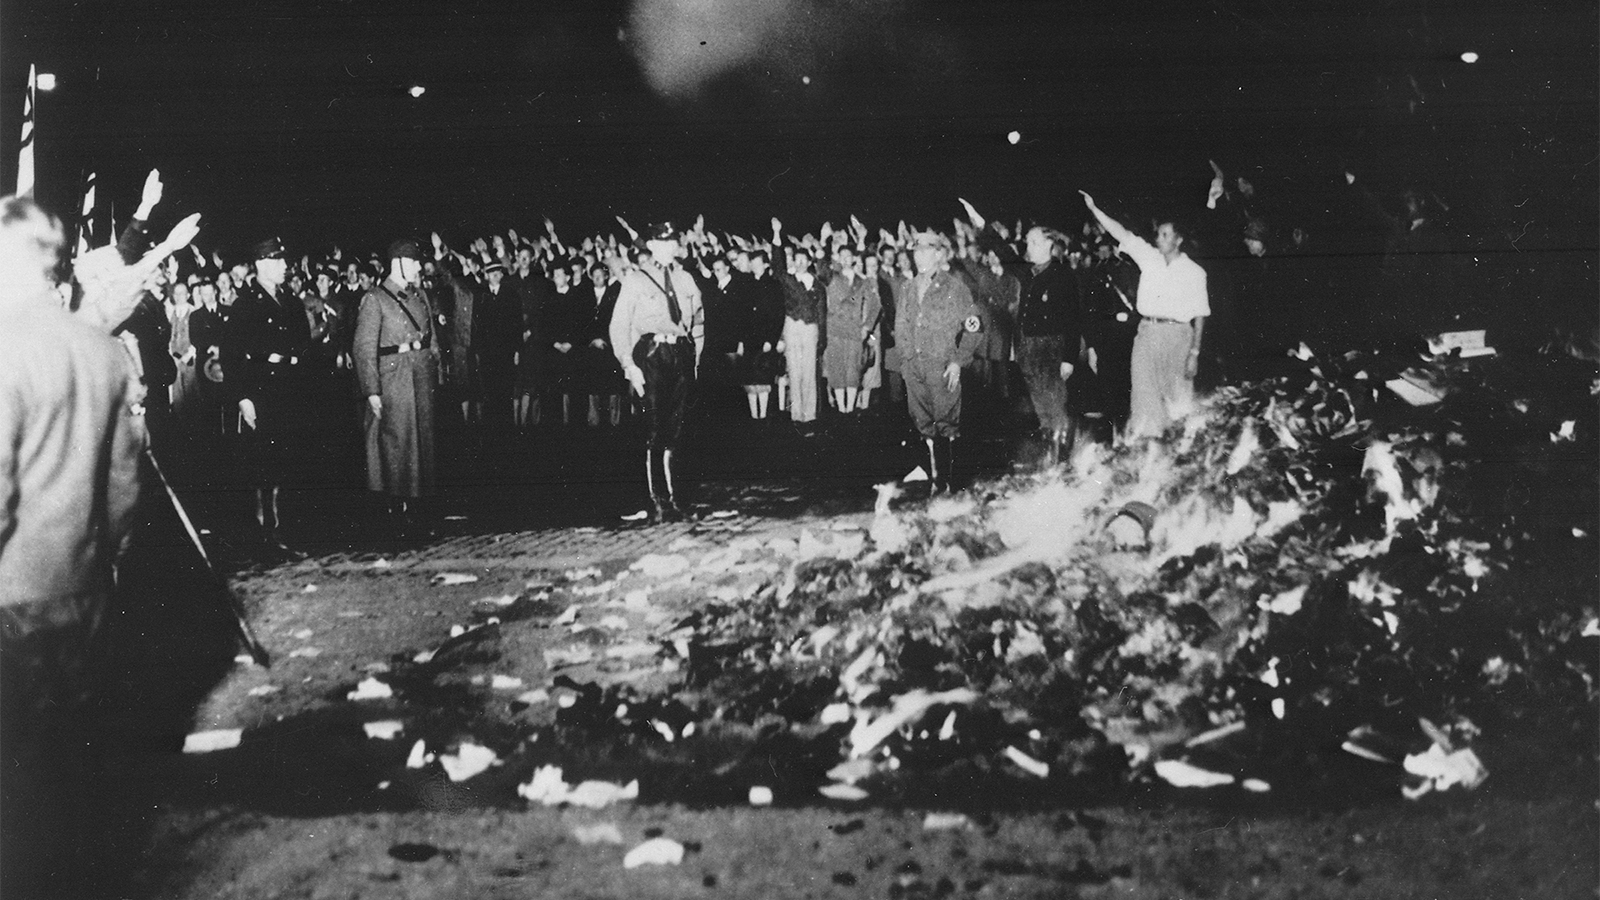 A Nazi book burning in Berlin's Opera Plaza on May 11, 1933. Photo by Georg Pahl/German Federal Archive/Creative Commons